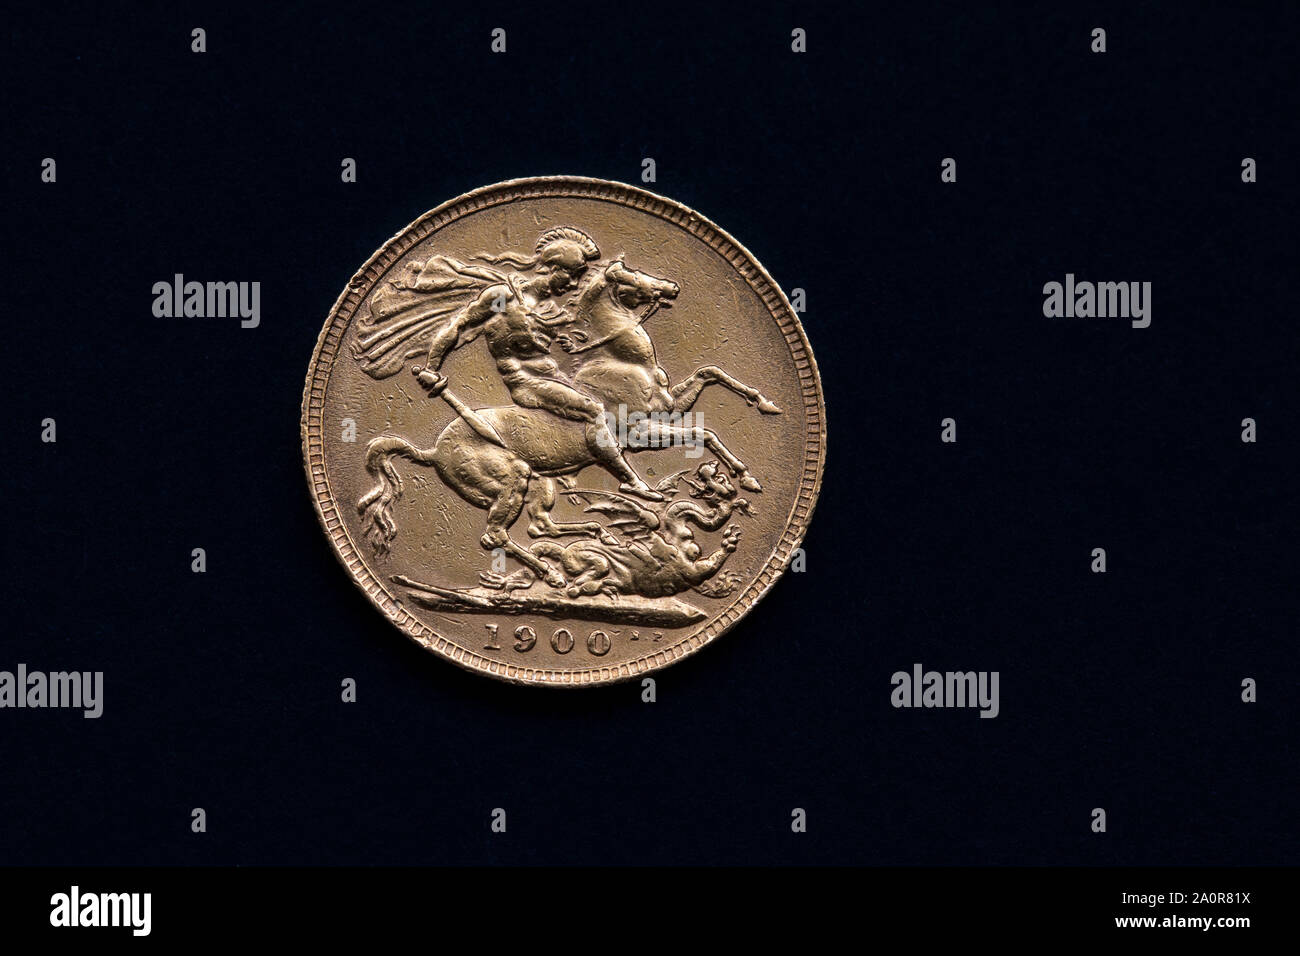 close up of a 1900 Victorian Gold sovereign on a black background showing the reverse side featuring saint George and the dragon Stock Photo